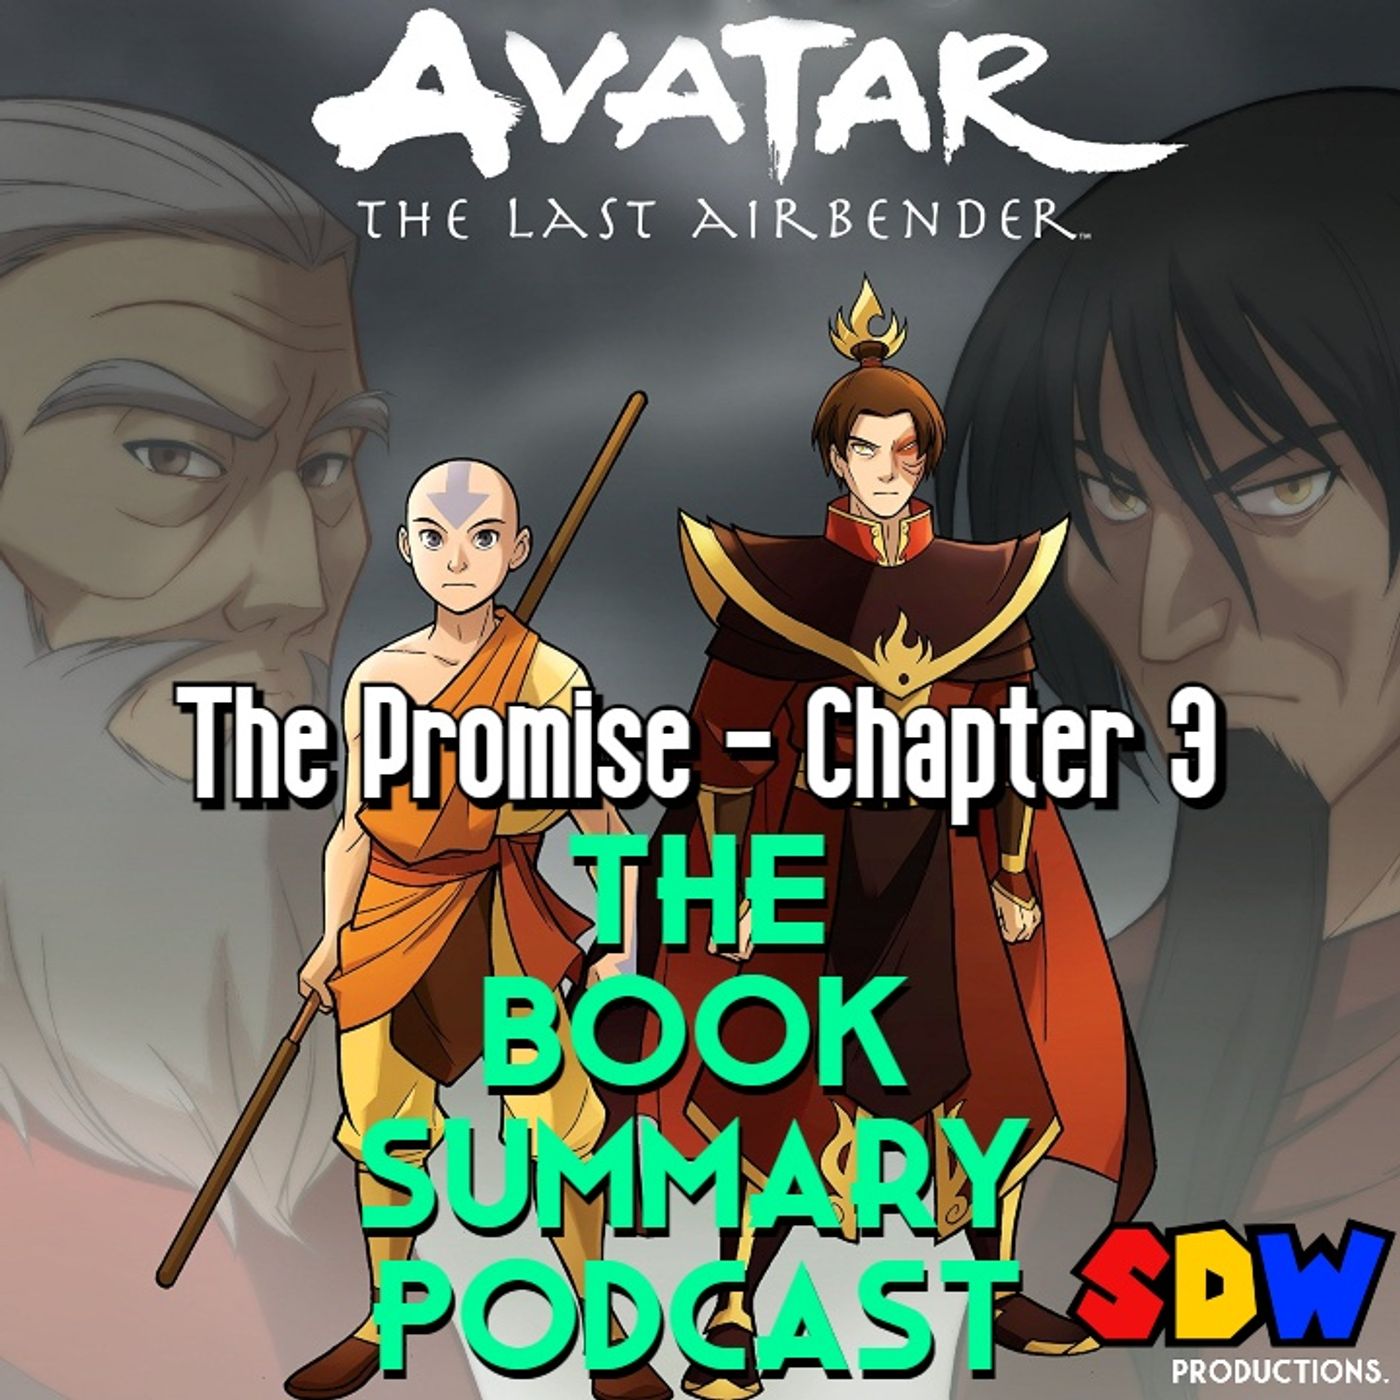 Avatar: The Last Airbender "The Promise" - Chapter 3